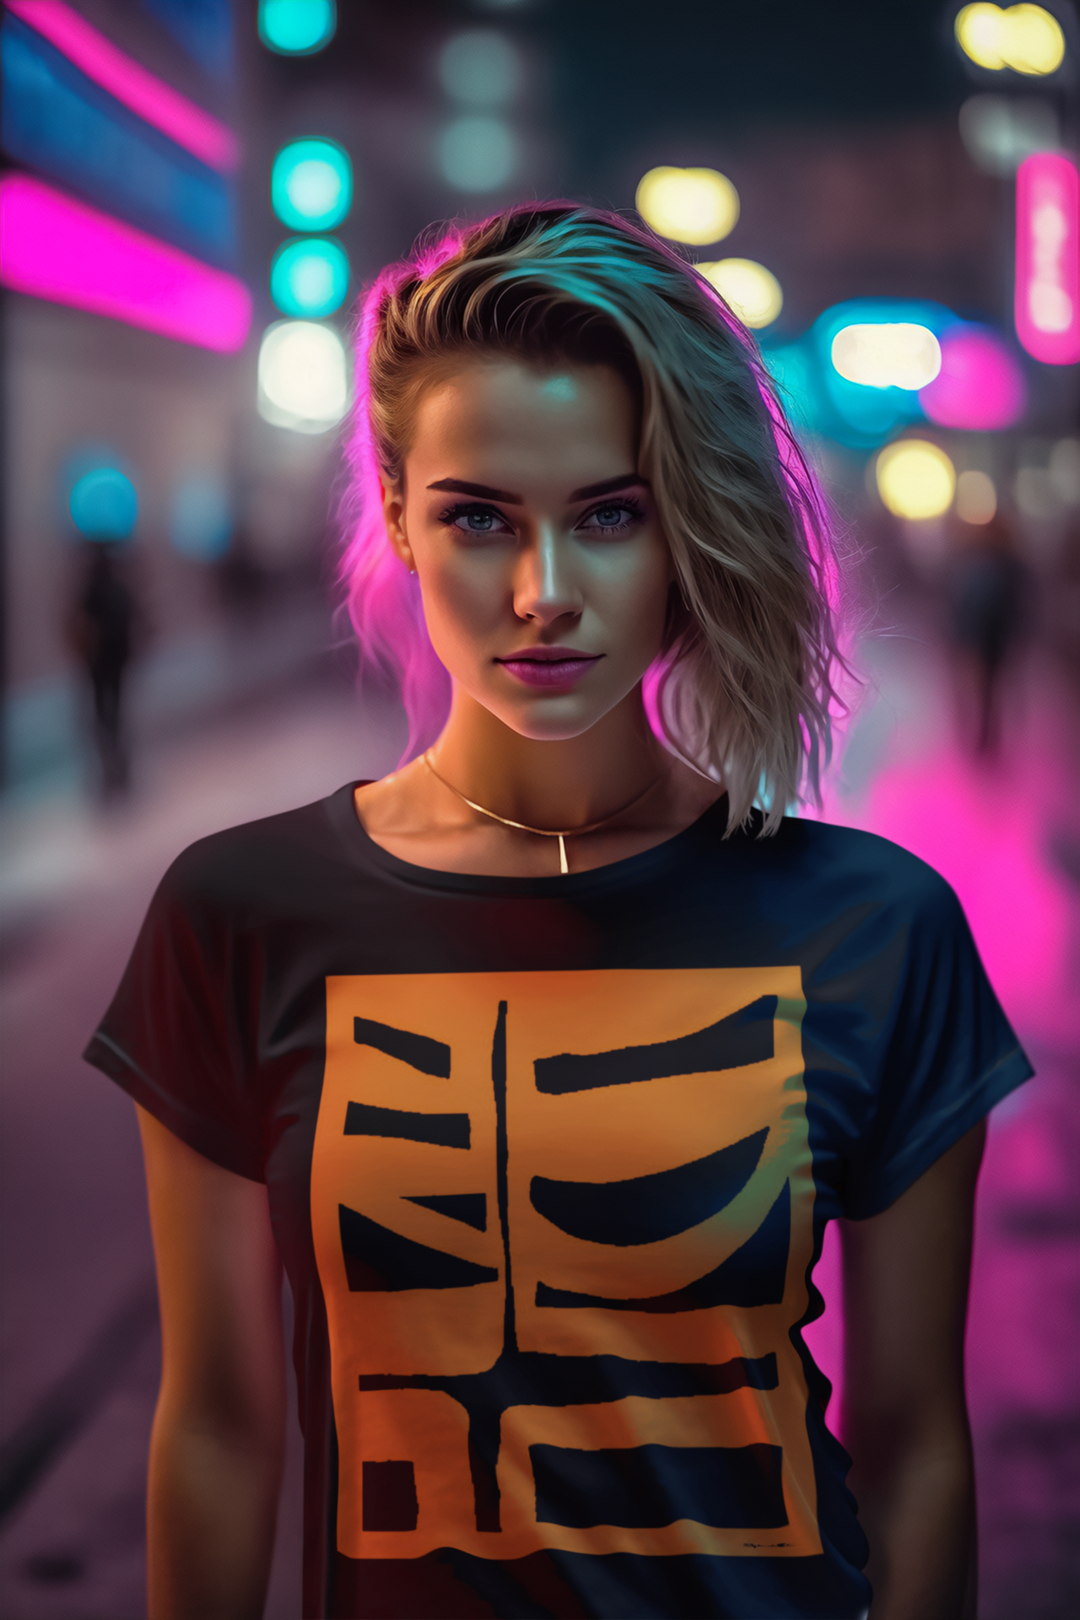 woman wearing a abstract t-shirt BI-500 in orange at night in the city with lights